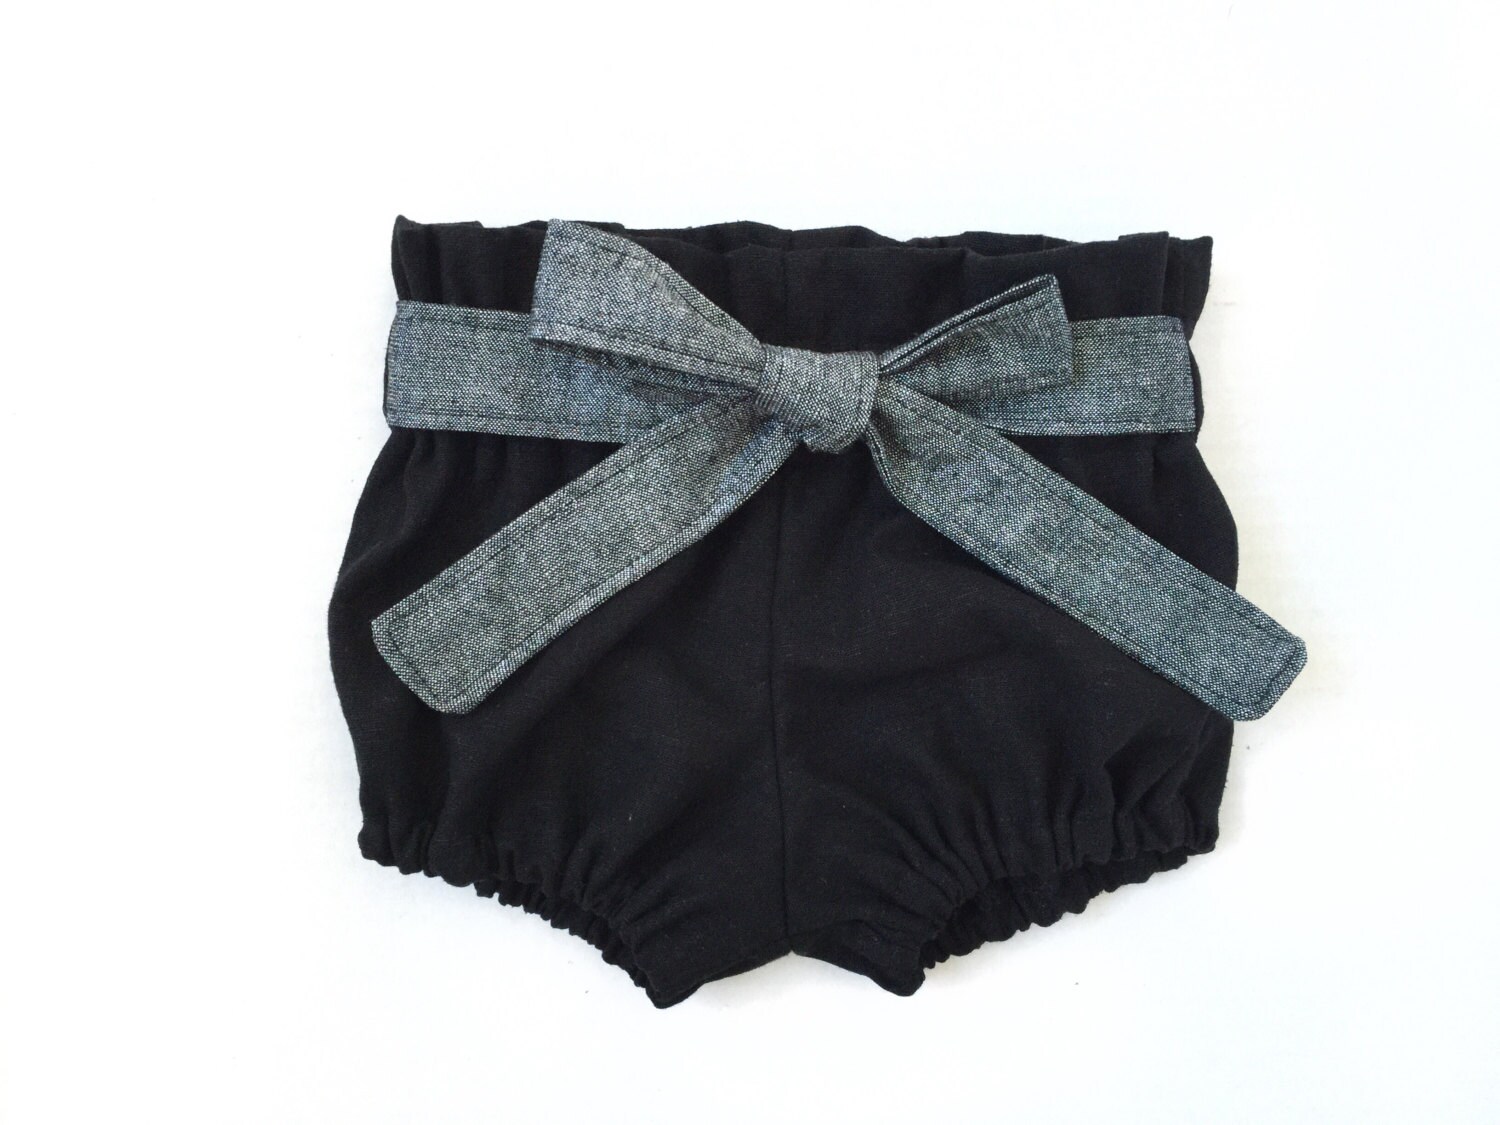 Black baby bloomers / Baby girl bloomers / Toddler girl